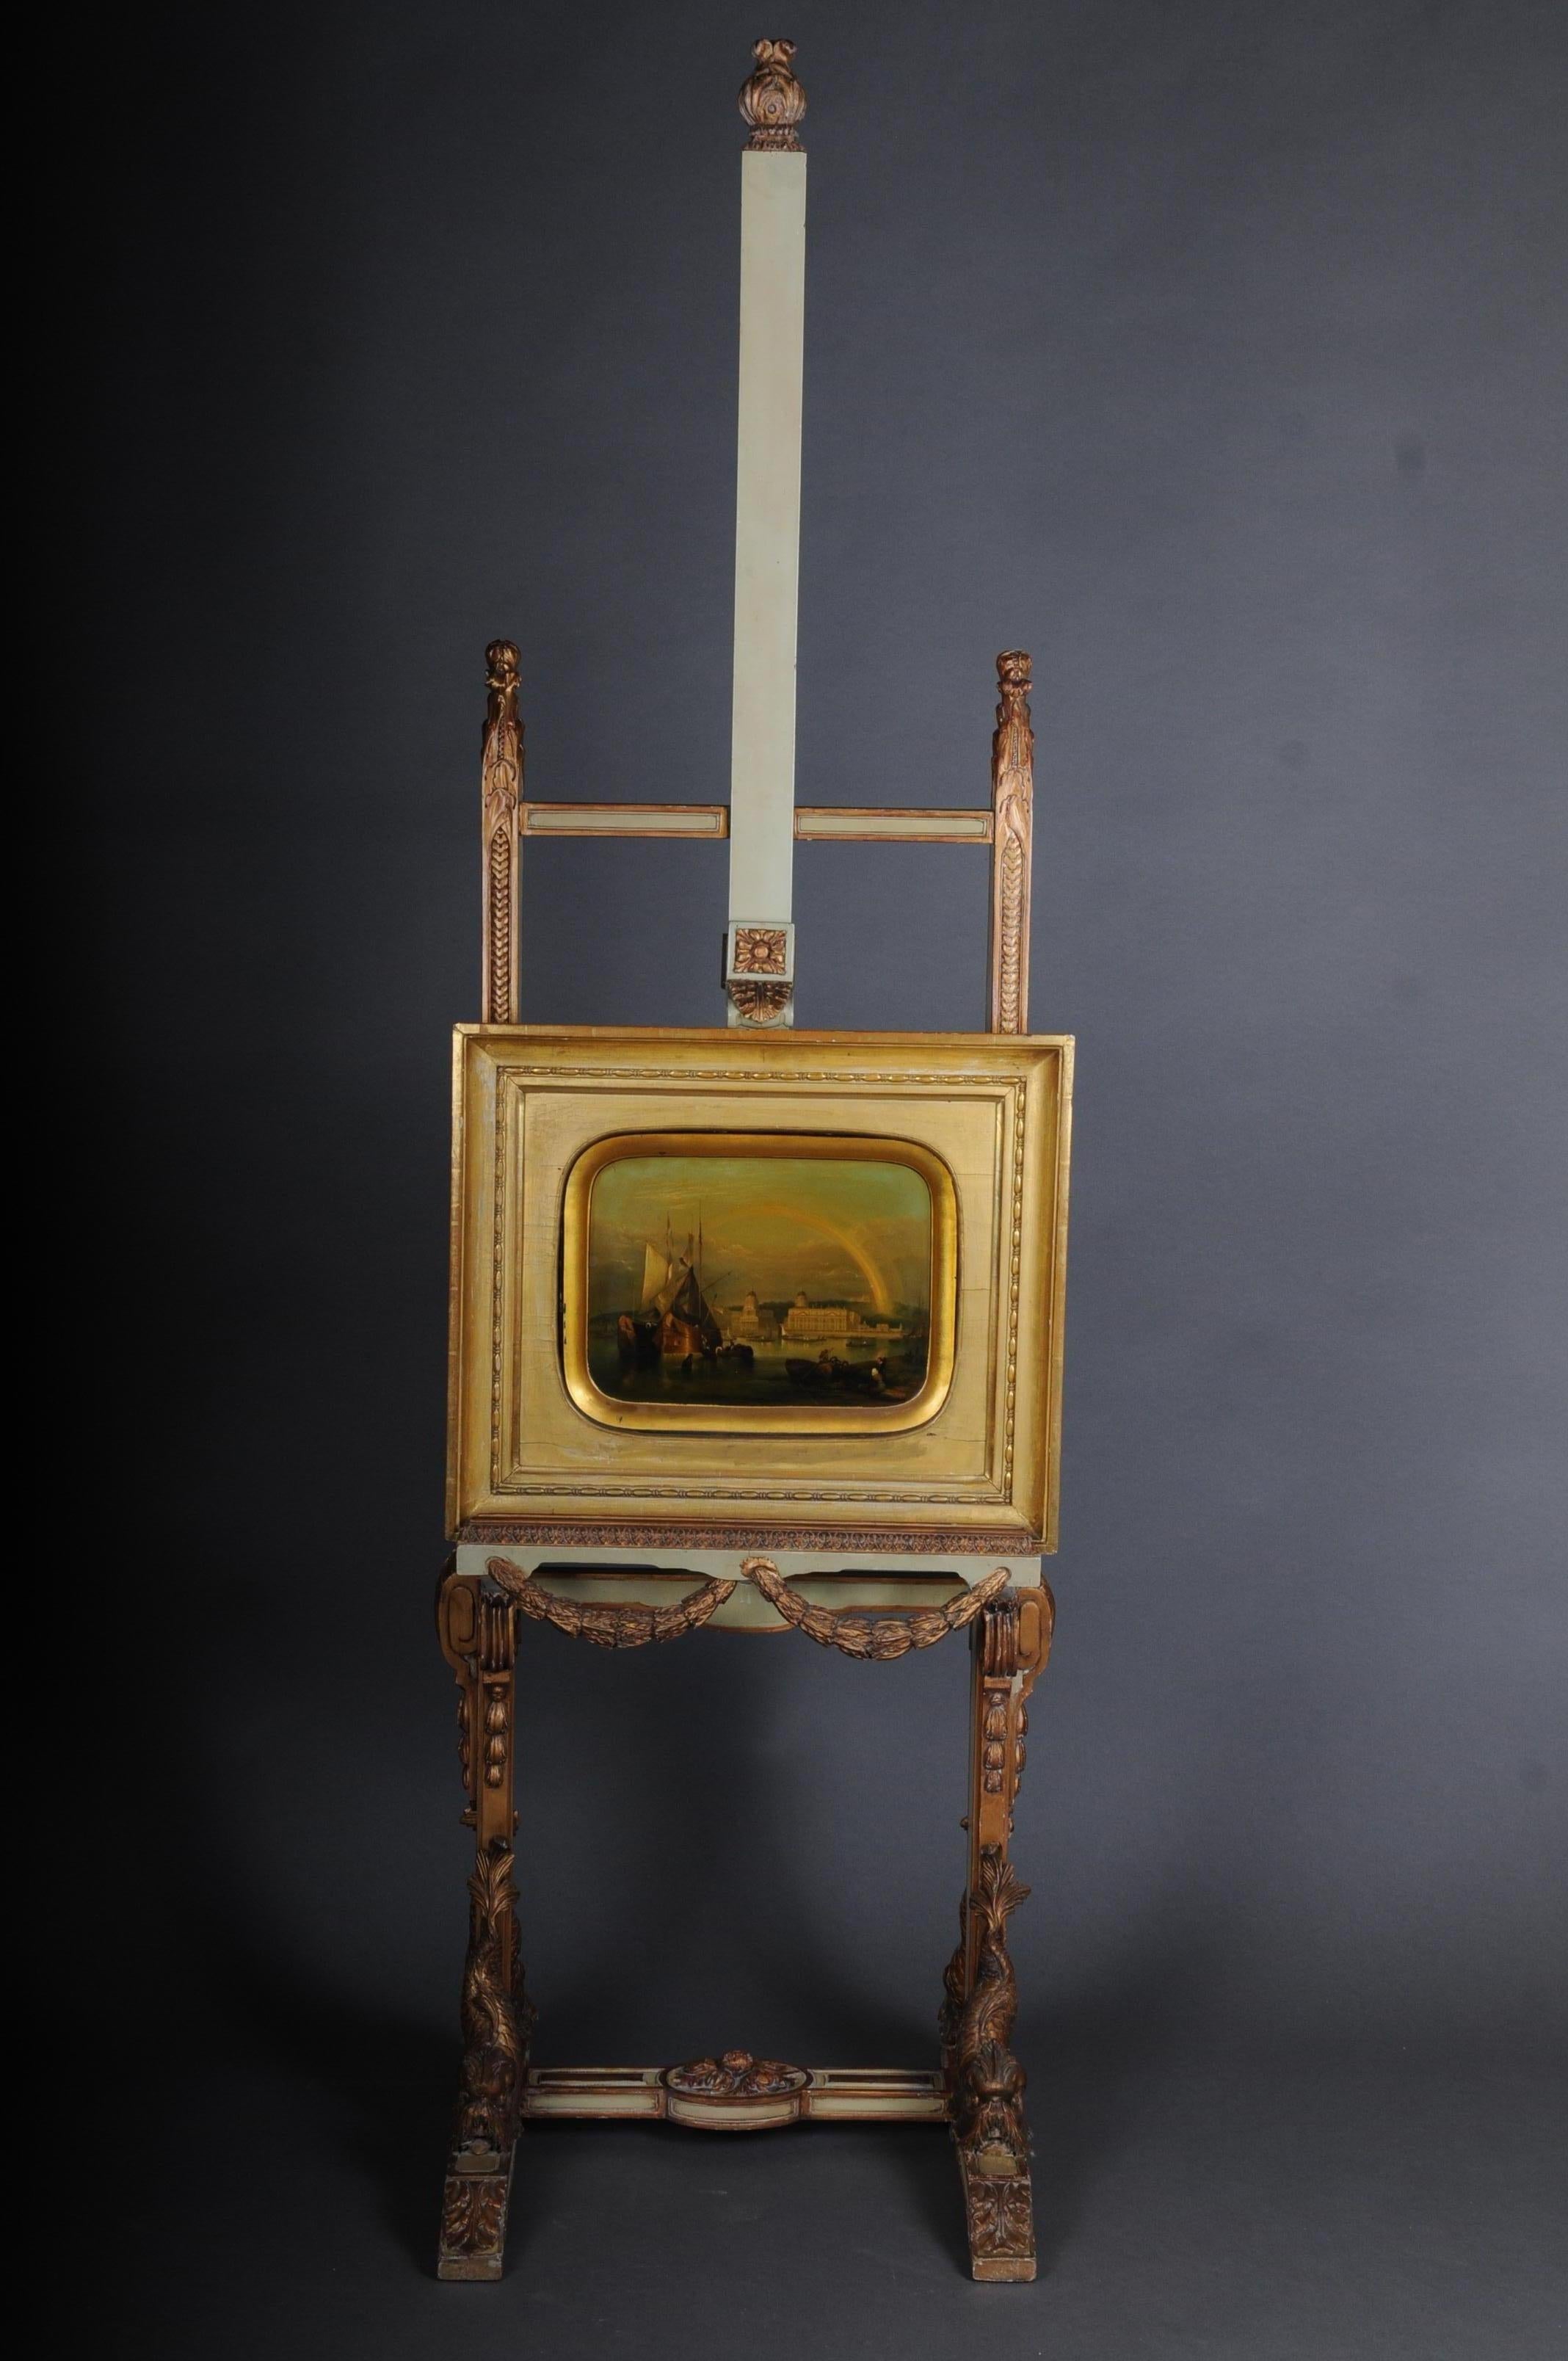 Antique easel with dolphins in Napoleon III, circa 1870

Solid beechwood body, hand carved. Richly ornamented and with 4 fully plastic, hand carved dolphins. Colored and gilded with poliment. Height-adjustable device up to a height of approximate